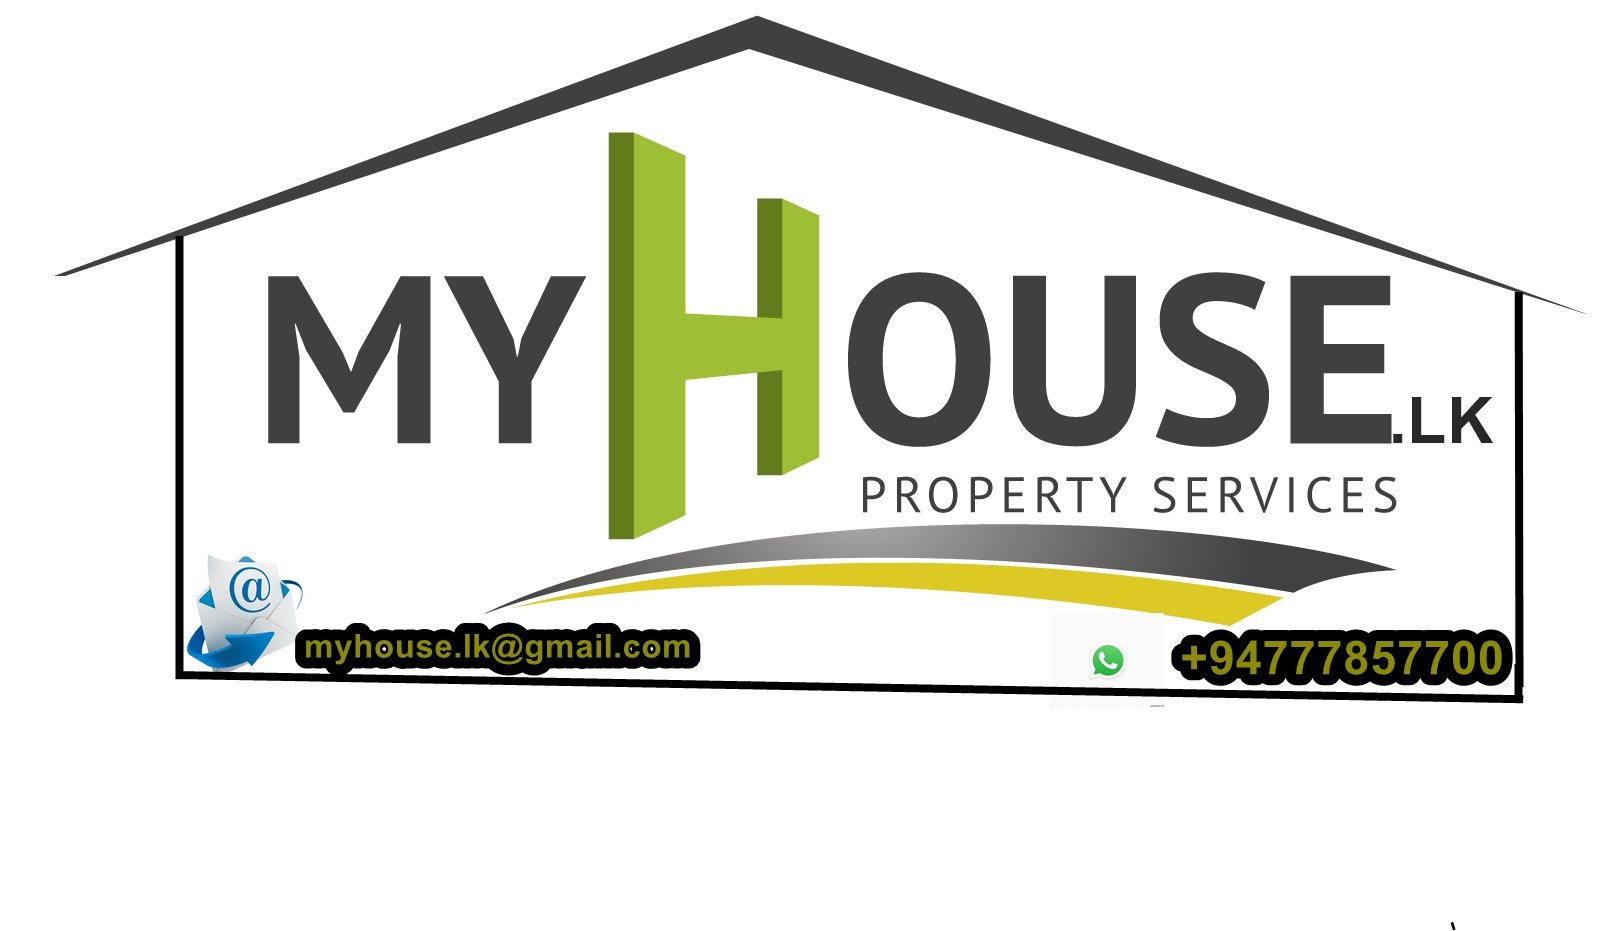 #MyhouseLK
Our Mission:
Our mission is to provide an outstanding level of service, excellence and expertise in the real estate market to our clients. To always